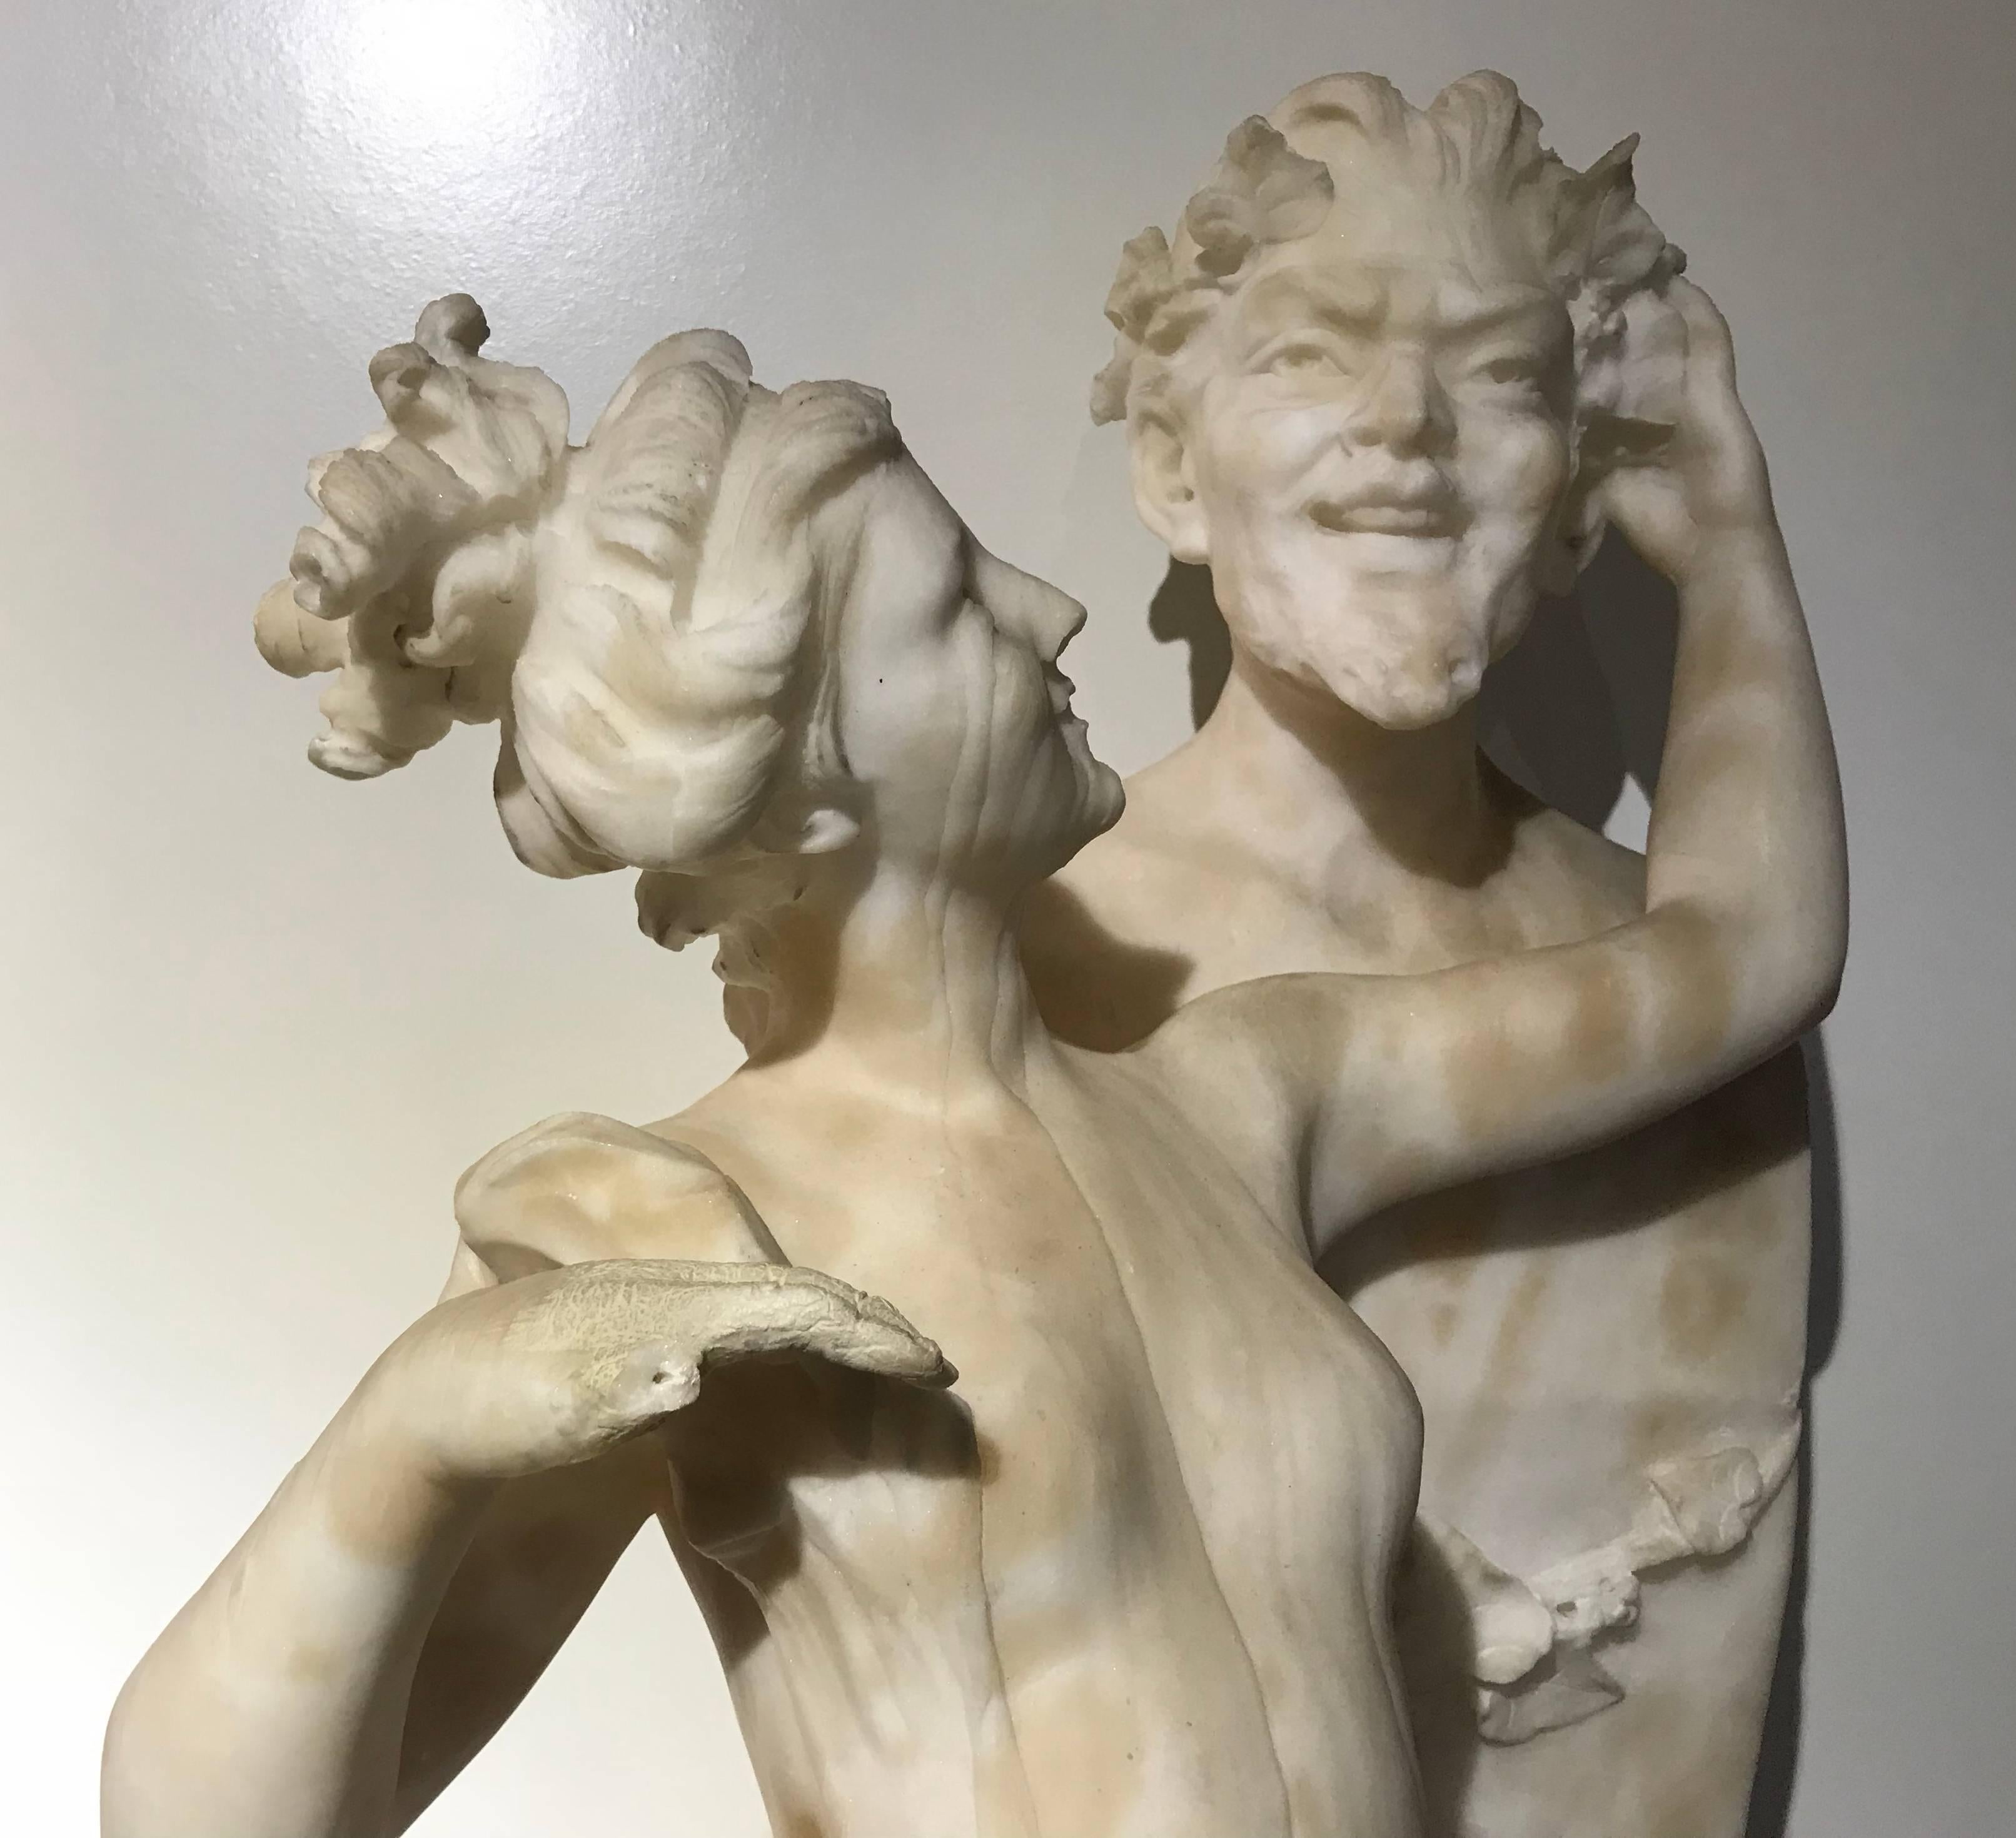 Neoclassical Italian Sculpture 19th Century White Tuscany Alabaster Marble Signed Fiaschi